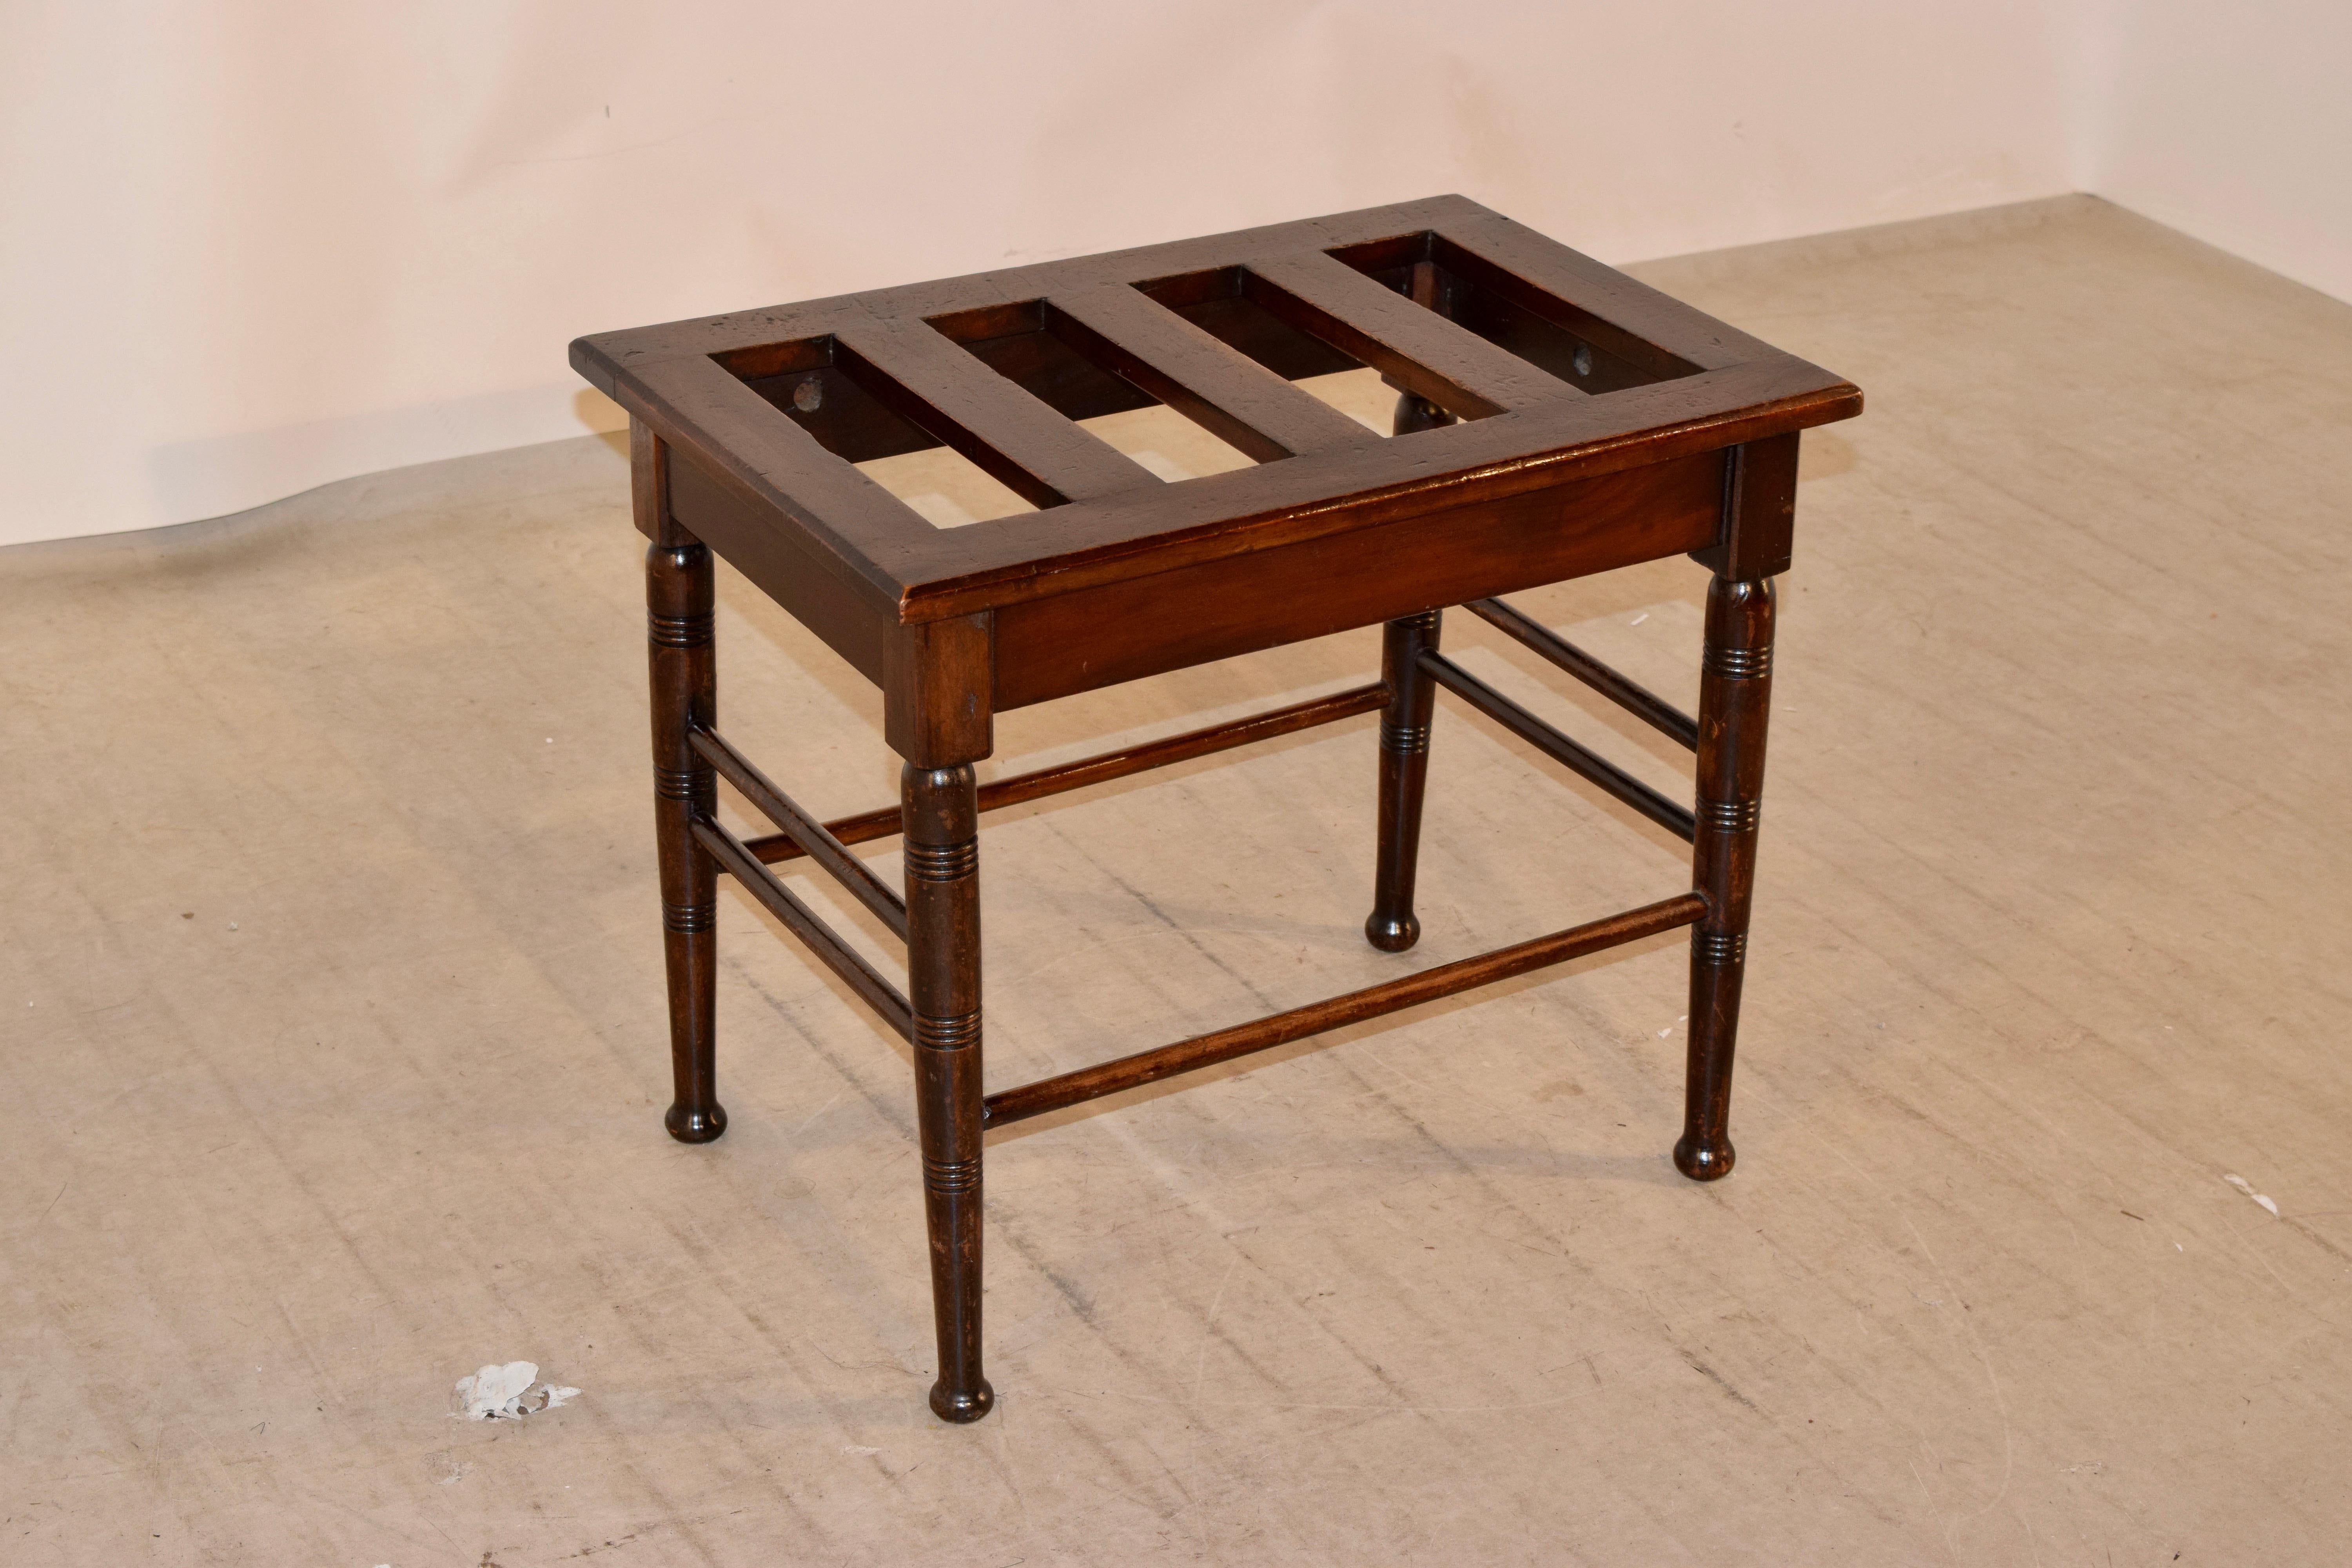 19th century English luggage stand made from mahogany. The top is slatted and has a nice overhang, the base has hand turned legs, which have routed decoration, and are joined by simple turned stretchers.